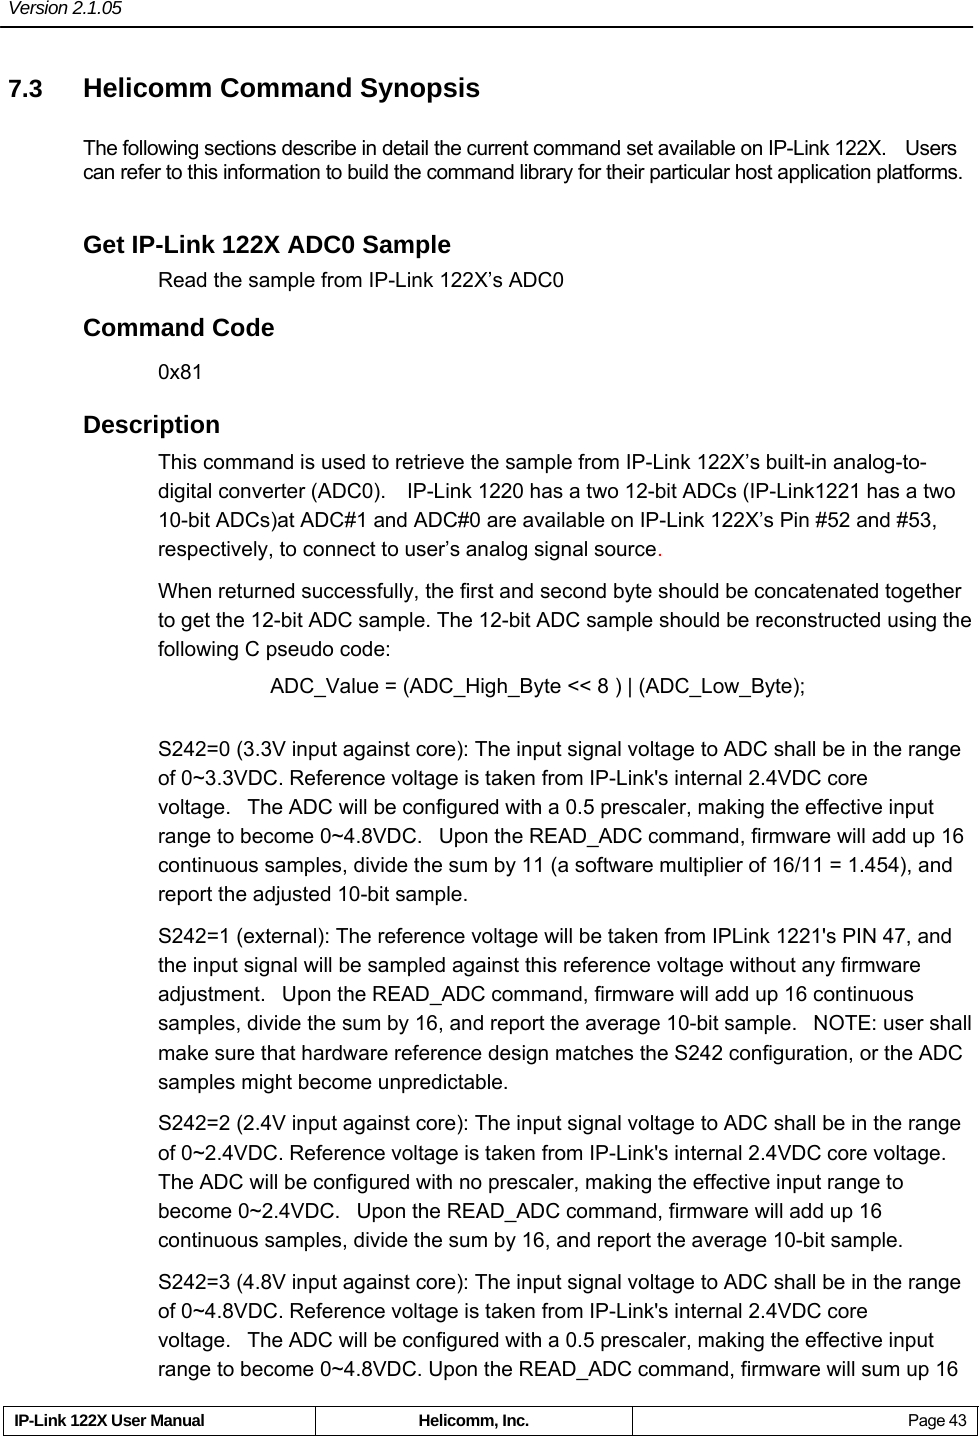 Version 2.1.05     IP-Link 122X User Manual  Helicomm, Inc.  Page 43 7.3  Helicomm Command Synopsis The following sections describe in detail the current command set available on IP-Link 122X.    Users can refer to this information to build the command library for their particular host application platforms. Get IP-Link 122X ADC0 Sample Read the sample from IP-Link 122X’s ADC0 Command Code 0x81 Description This command is used to retrieve the sample from IP-Link 122X’s built-in analog-to-digital converter (ADC0).    IP-Link 1220 has a two 12-bit ADCs (IP-Link1221 has a two 10-bit ADCs)at ADC#1 and ADC#0 are available on IP-Link 122X’s Pin #52 and #53, respectively, to connect to user’s analog signal source.  When returned successfully, the first and second byte should be concatenated together to get the 12-bit ADC sample. The 12-bit ADC sample should be reconstructed using the following C pseudo code:  ADC_Value = (ADC_High_Byte &lt;&lt; 8 ) | (ADC_Low_Byte);  S242=0 (3.3V input against core): The input signal voltage to ADC shall be in the range of 0~3.3VDC. Reference voltage is taken from IP-Link&apos;s internal 2.4VDC core voltage.   The ADC will be configured with a 0.5 prescaler, making the effective input range to become 0~4.8VDC.   Upon the READ_ADC command, firmware will add up 16 continuous samples, divide the sum by 11 (a software multiplier of 16/11 = 1.454), and report the adjusted 10-bit sample. S242=1 (external): The reference voltage will be taken from IPLink 1221&apos;s PIN 47, and the input signal will be sampled against this reference voltage without any firmware adjustment.   Upon the READ_ADC command, firmware will add up 16 continuous samples, divide the sum by 16, and report the average 10-bit sample.   NOTE: user shall make sure that hardware reference design matches the S242 configuration, or the ADC samples might become unpredictable. S242=2 (2.4V input against core): The input signal voltage to ADC shall be in the range of 0~2.4VDC. Reference voltage is taken from IP-Link&apos;s internal 2.4VDC core voltage. The ADC will be configured with no prescaler, making the effective input range to become 0~2.4VDC.   Upon the READ_ADC command, firmware will add up 16 continuous samples, divide the sum by 16, and report the average 10-bit sample. S242=3 (4.8V input against core): The input signal voltage to ADC shall be in the range of 0~4.8VDC. Reference voltage is taken from IP-Link&apos;s internal 2.4VDC core voltage.   The ADC will be configured with a 0.5 prescaler, making the effective input range to become 0~4.8VDC. Upon the READ_ADC command, firmware will sum up 16 